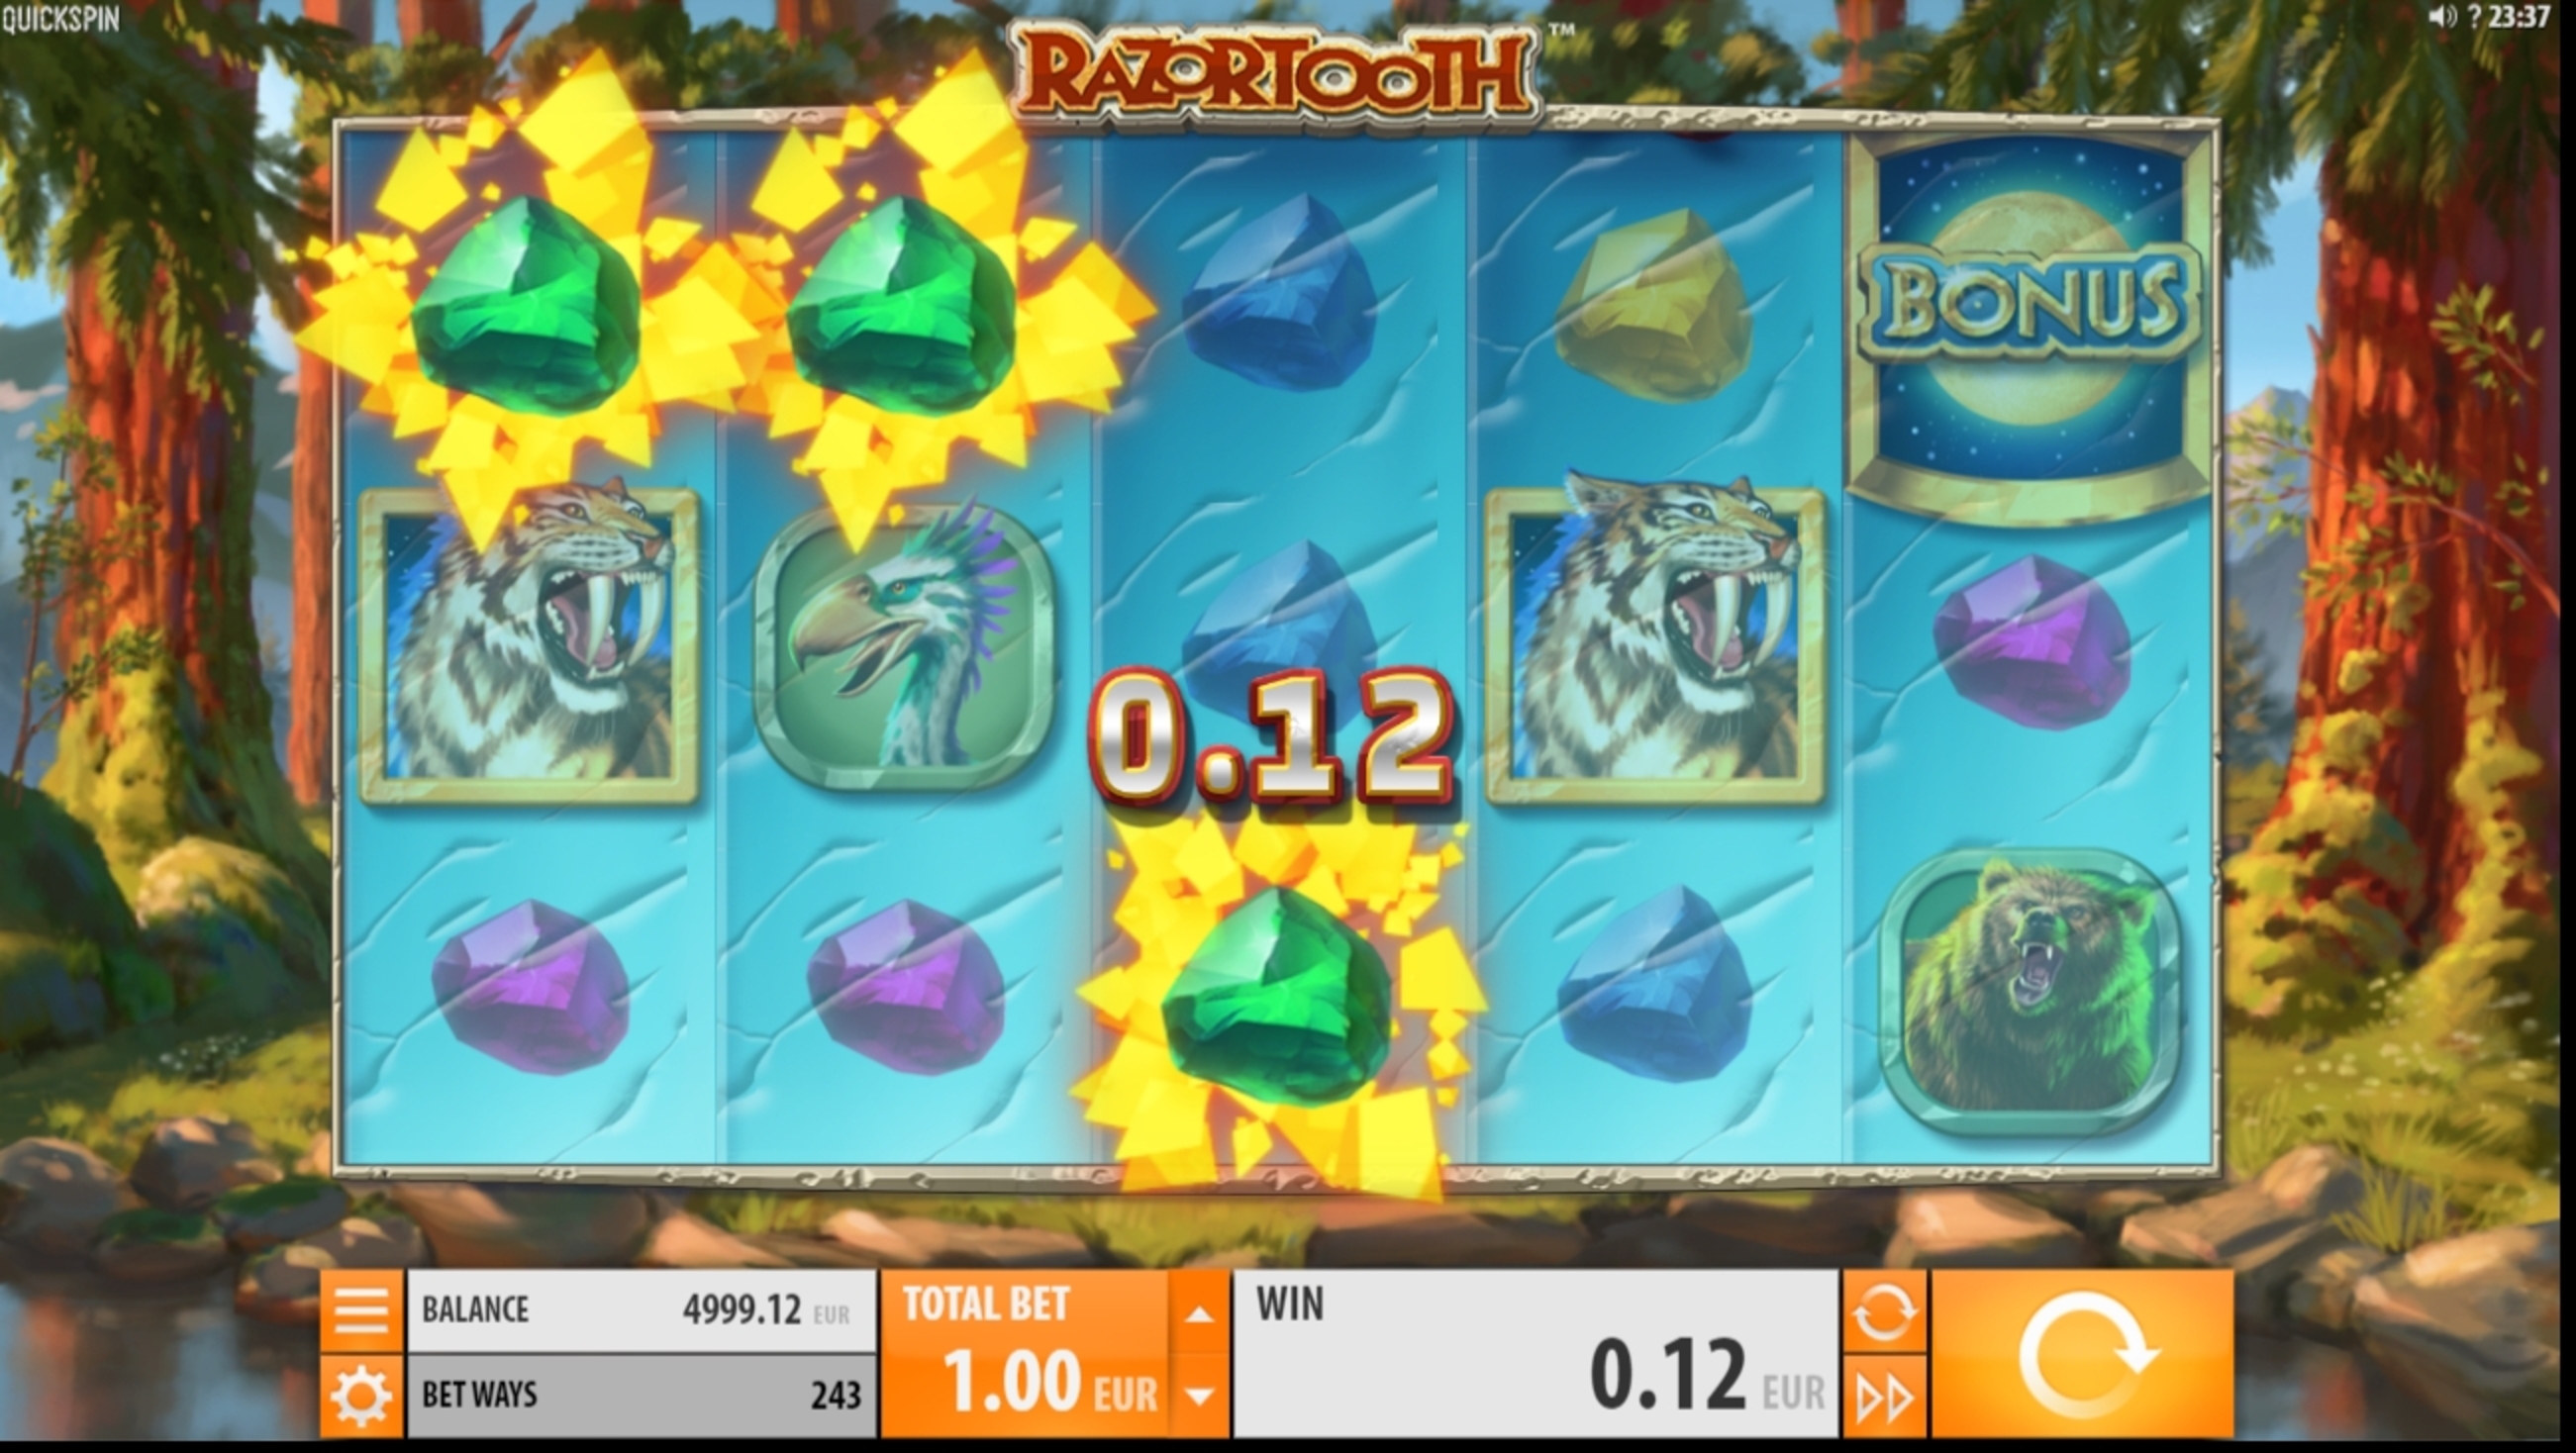 Win Money in Razortooth Free Slot Game by Quickspin